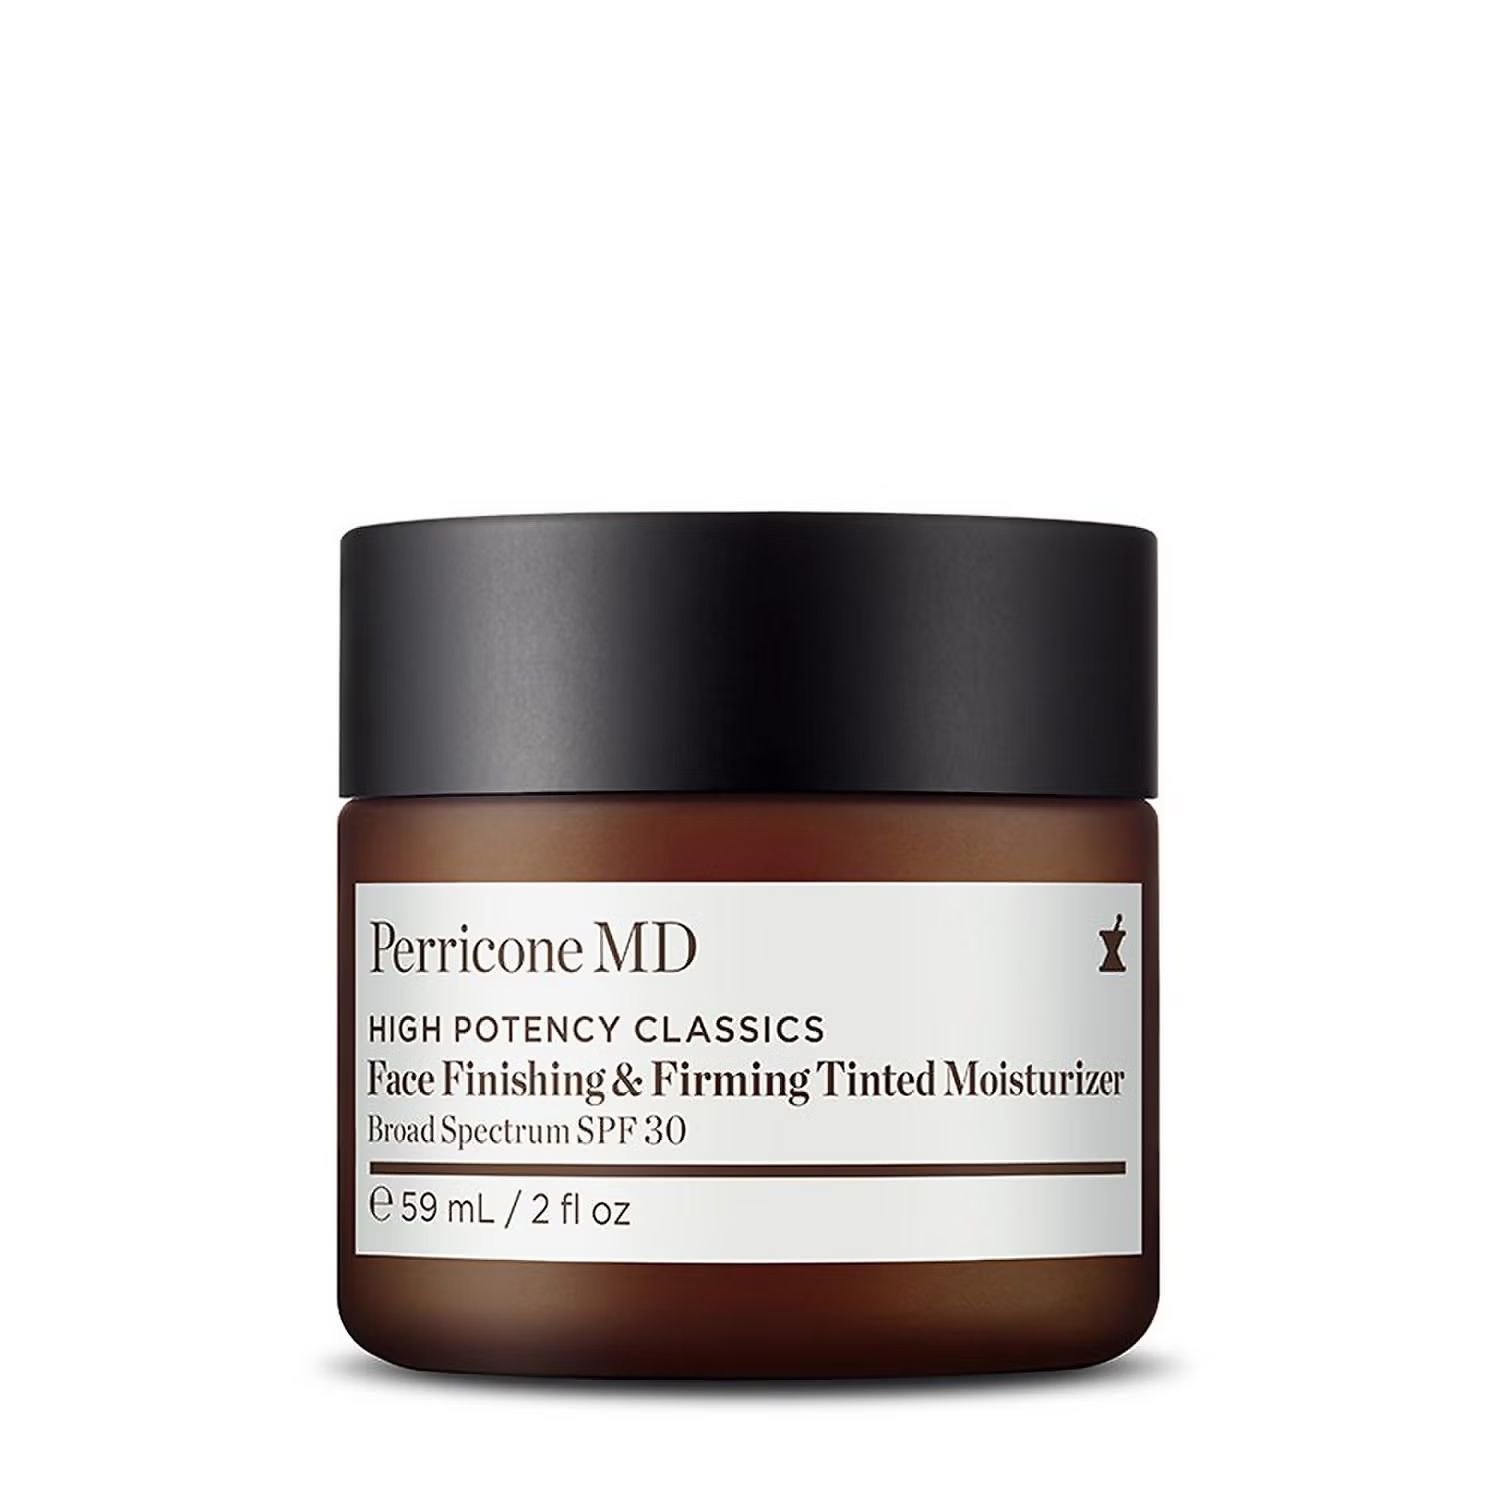 Perricone MD Face Finishing & Firming Tinted Moisturizer SPF30 | Skincare RX